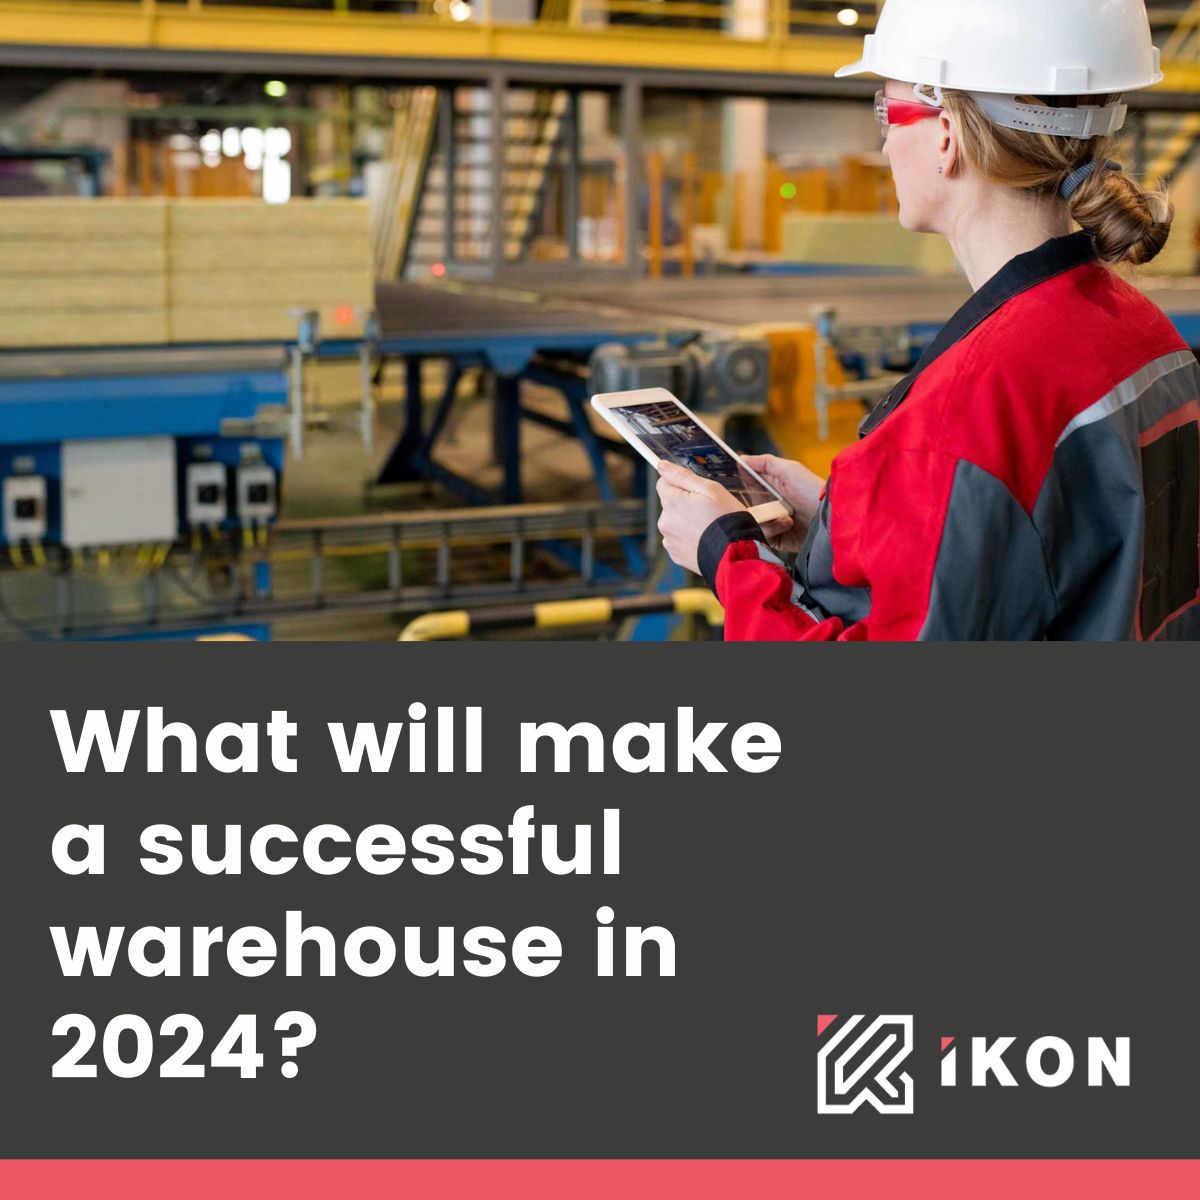 WHAT WILL MAKE A SUCCESSFUL WAREHOUSE IN 2024?